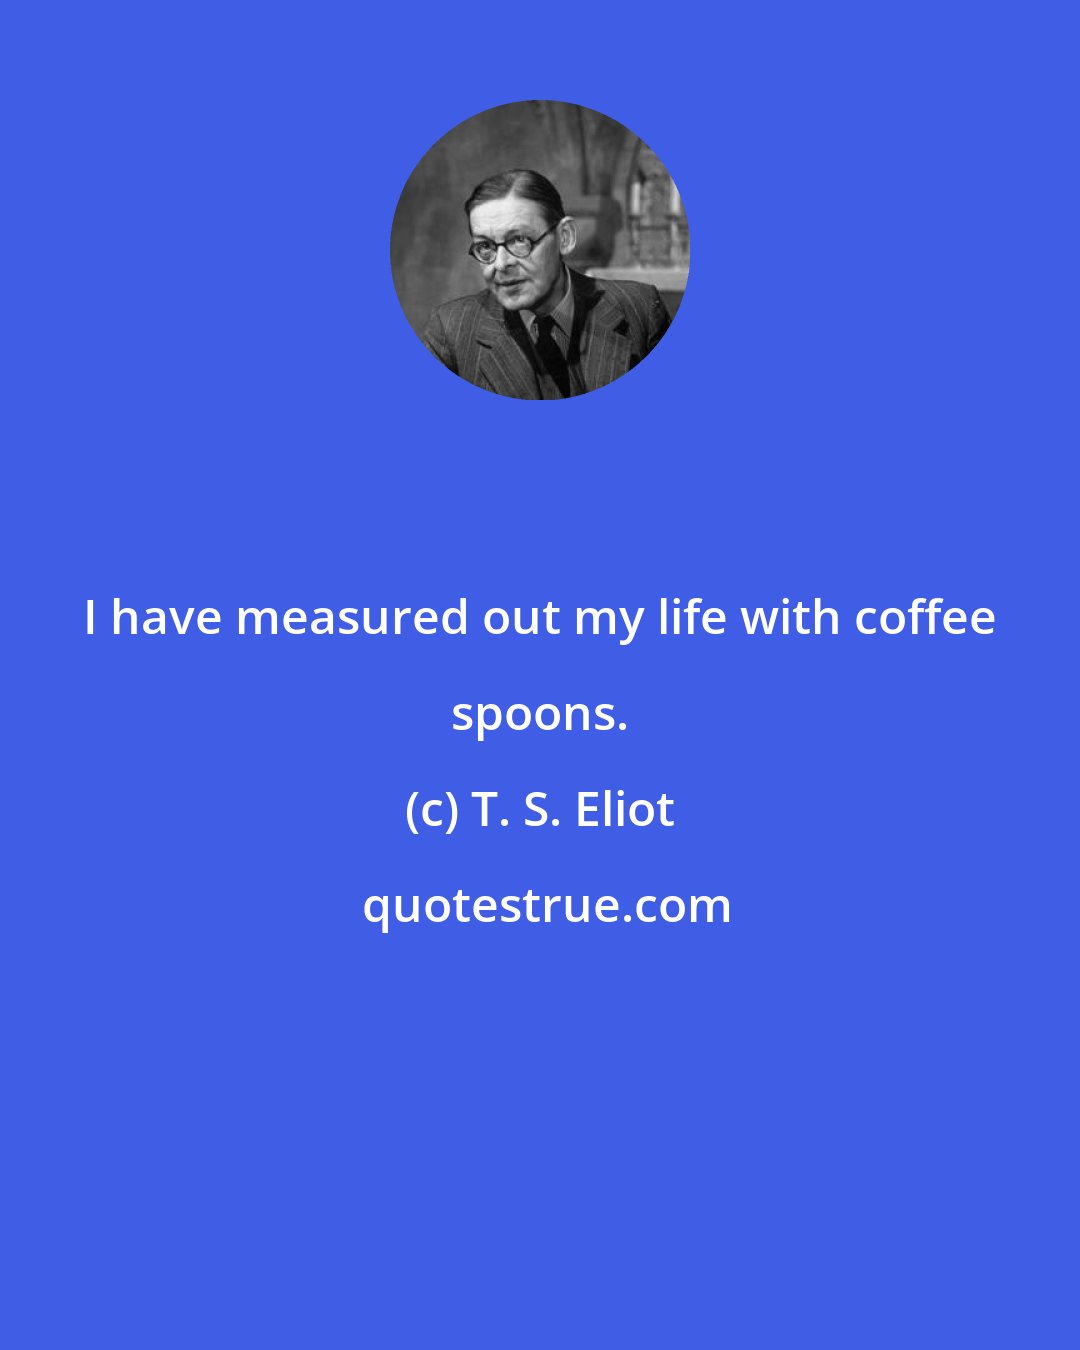 T. S. Eliot: I have measured out my life with coffee spoons.